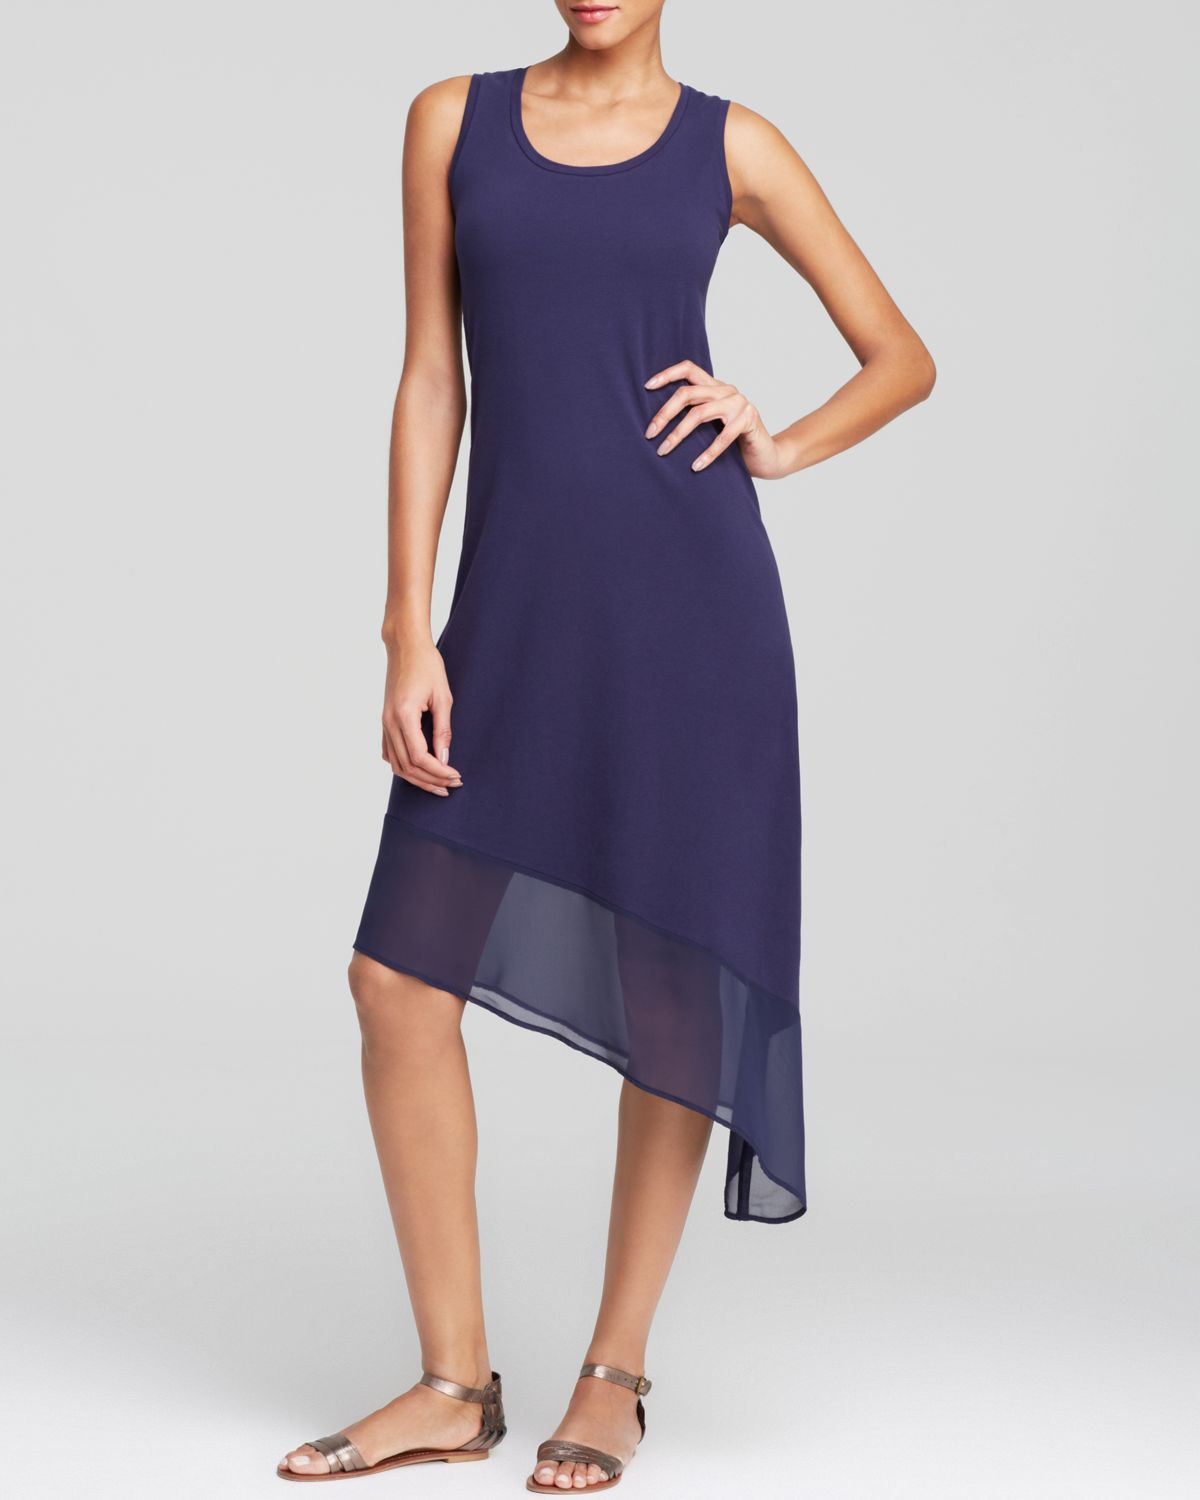 Lyst - Tommy Bahama Asymmetrical Dress Swim Cover Up in Blue